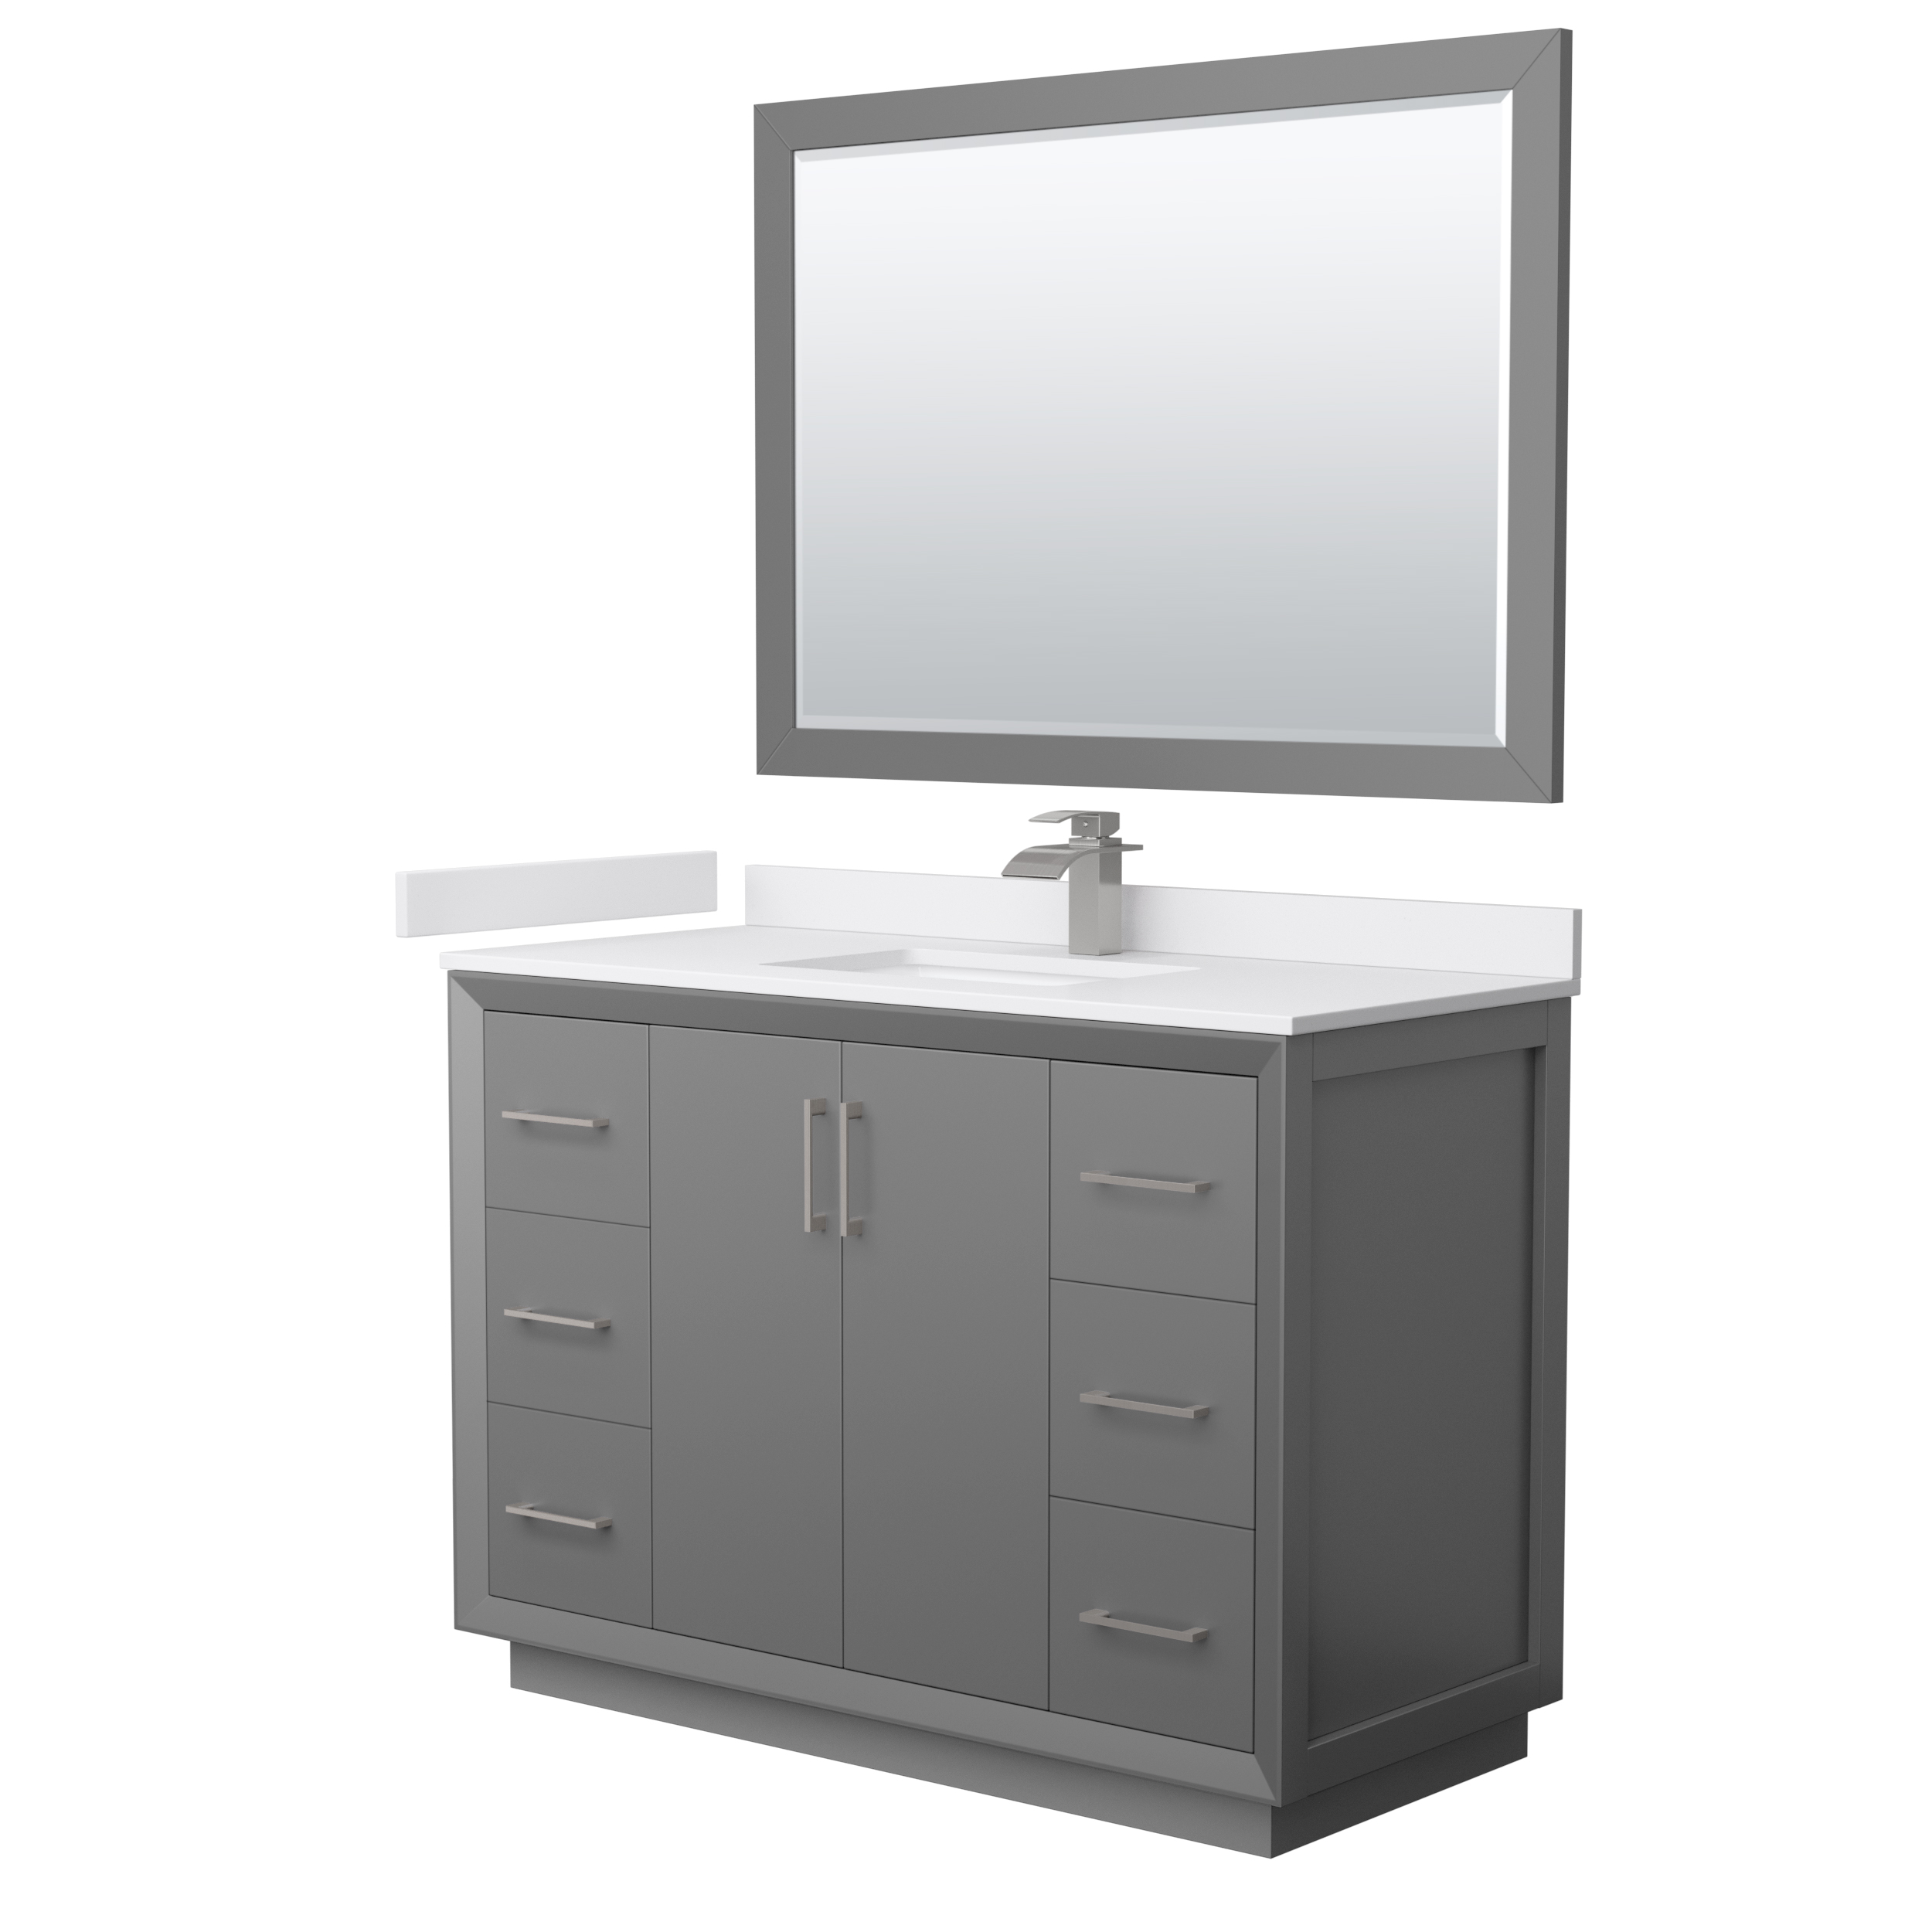 strada 48" single vanity with optional cultured marble counter - dark gray